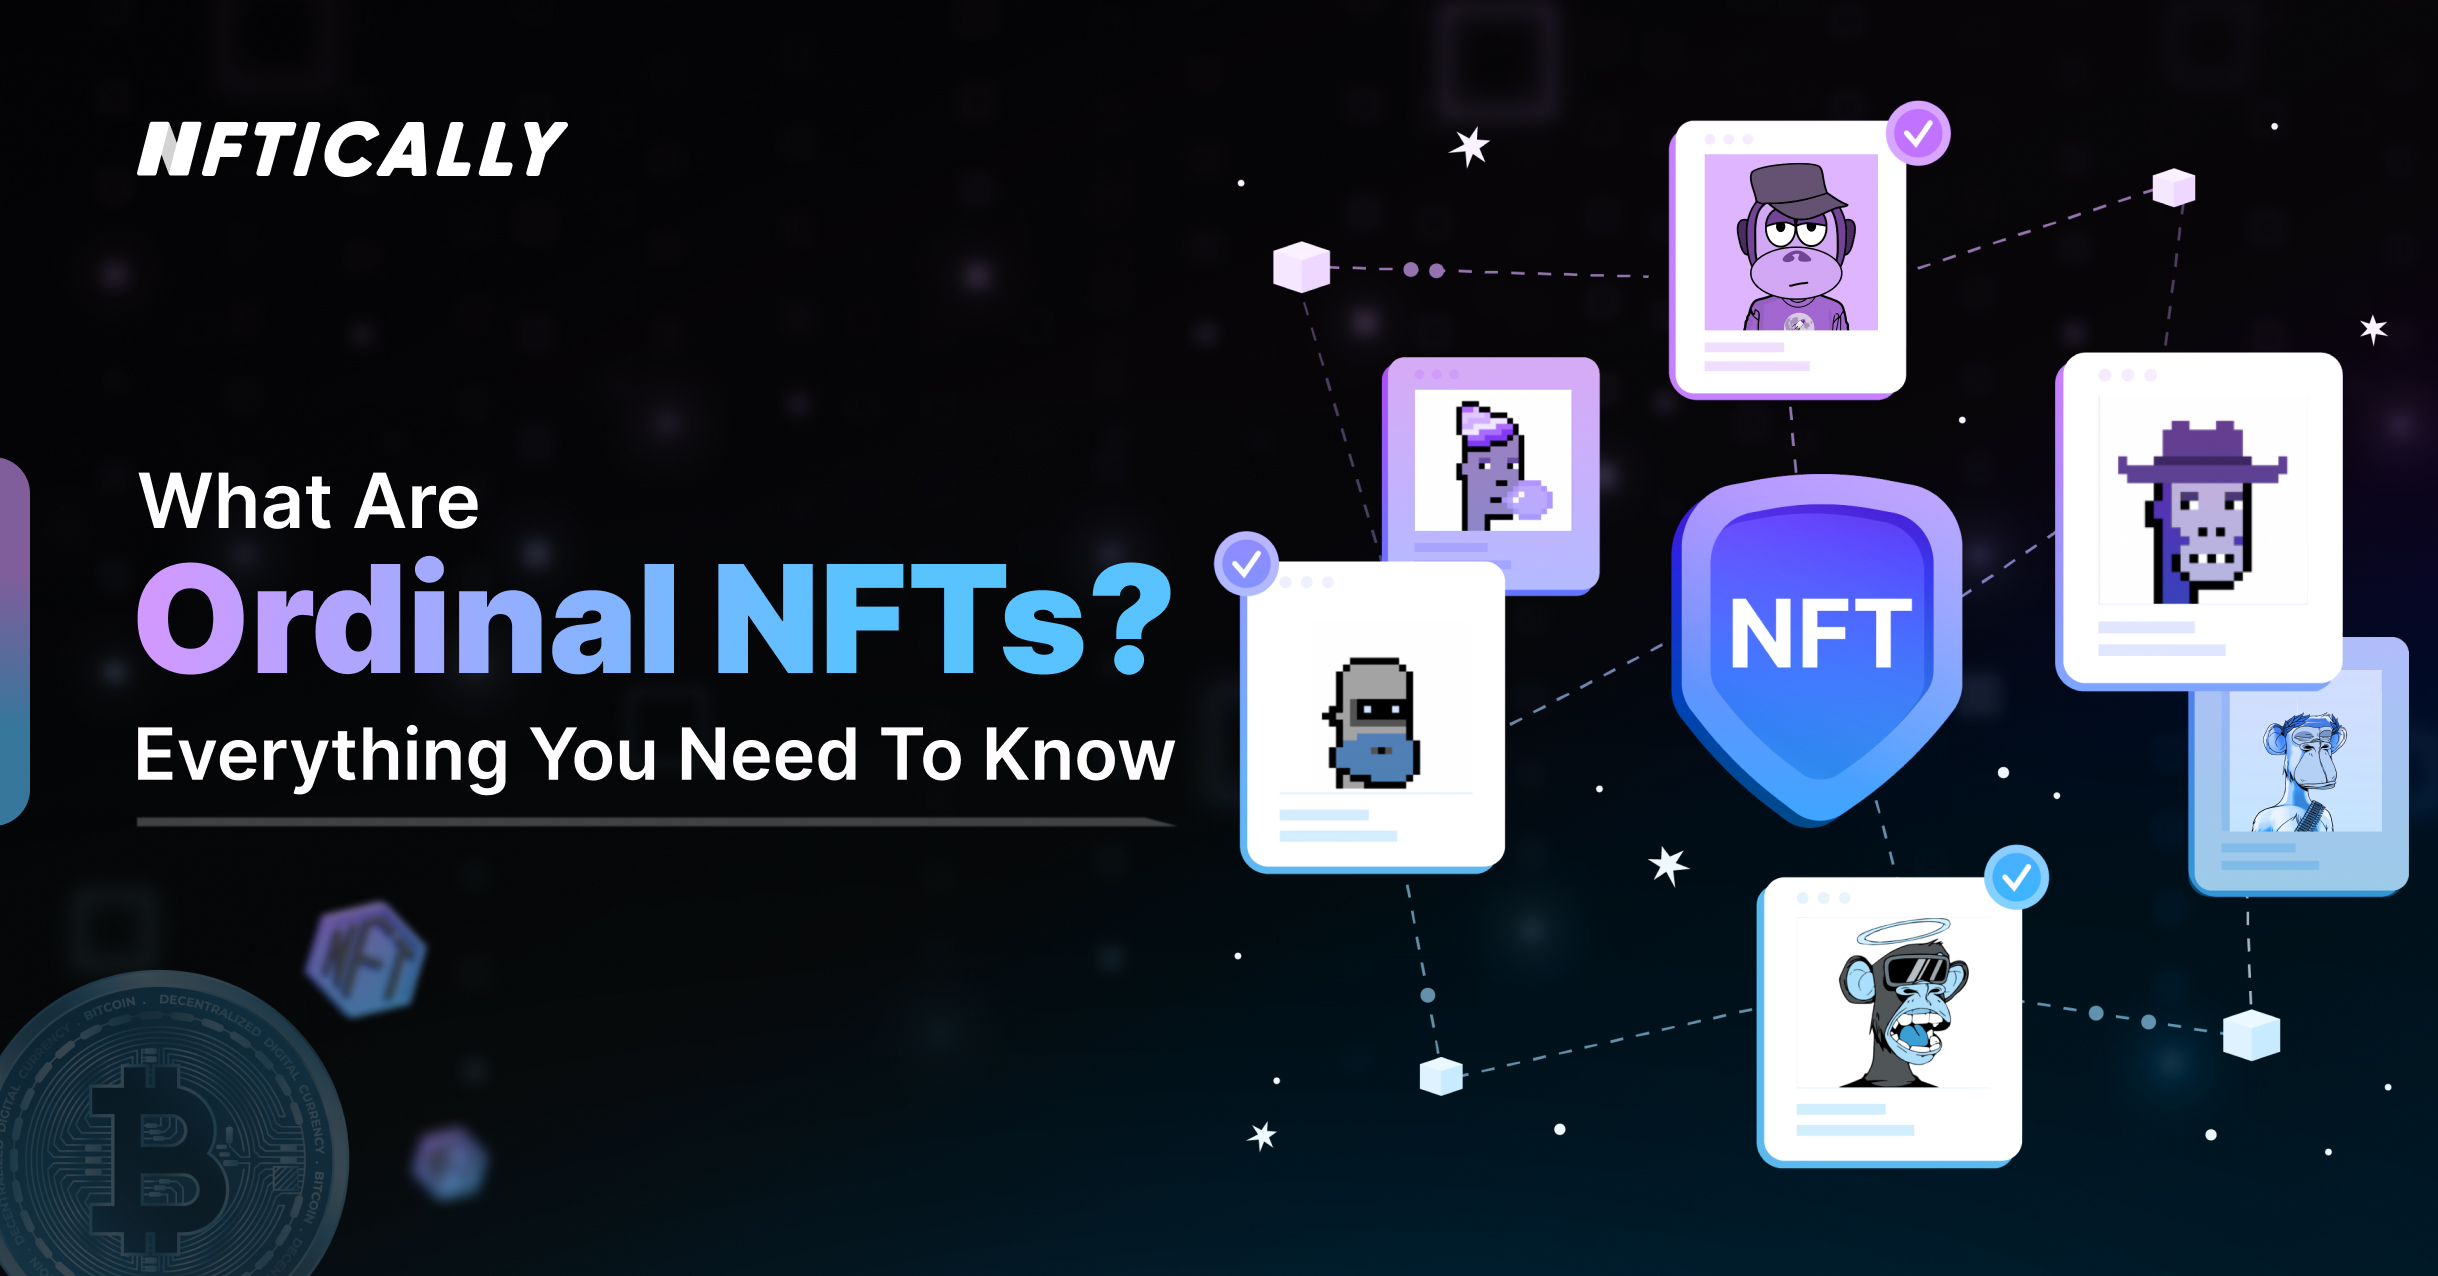 What Are Ordinal NFTs? Everything you need to know